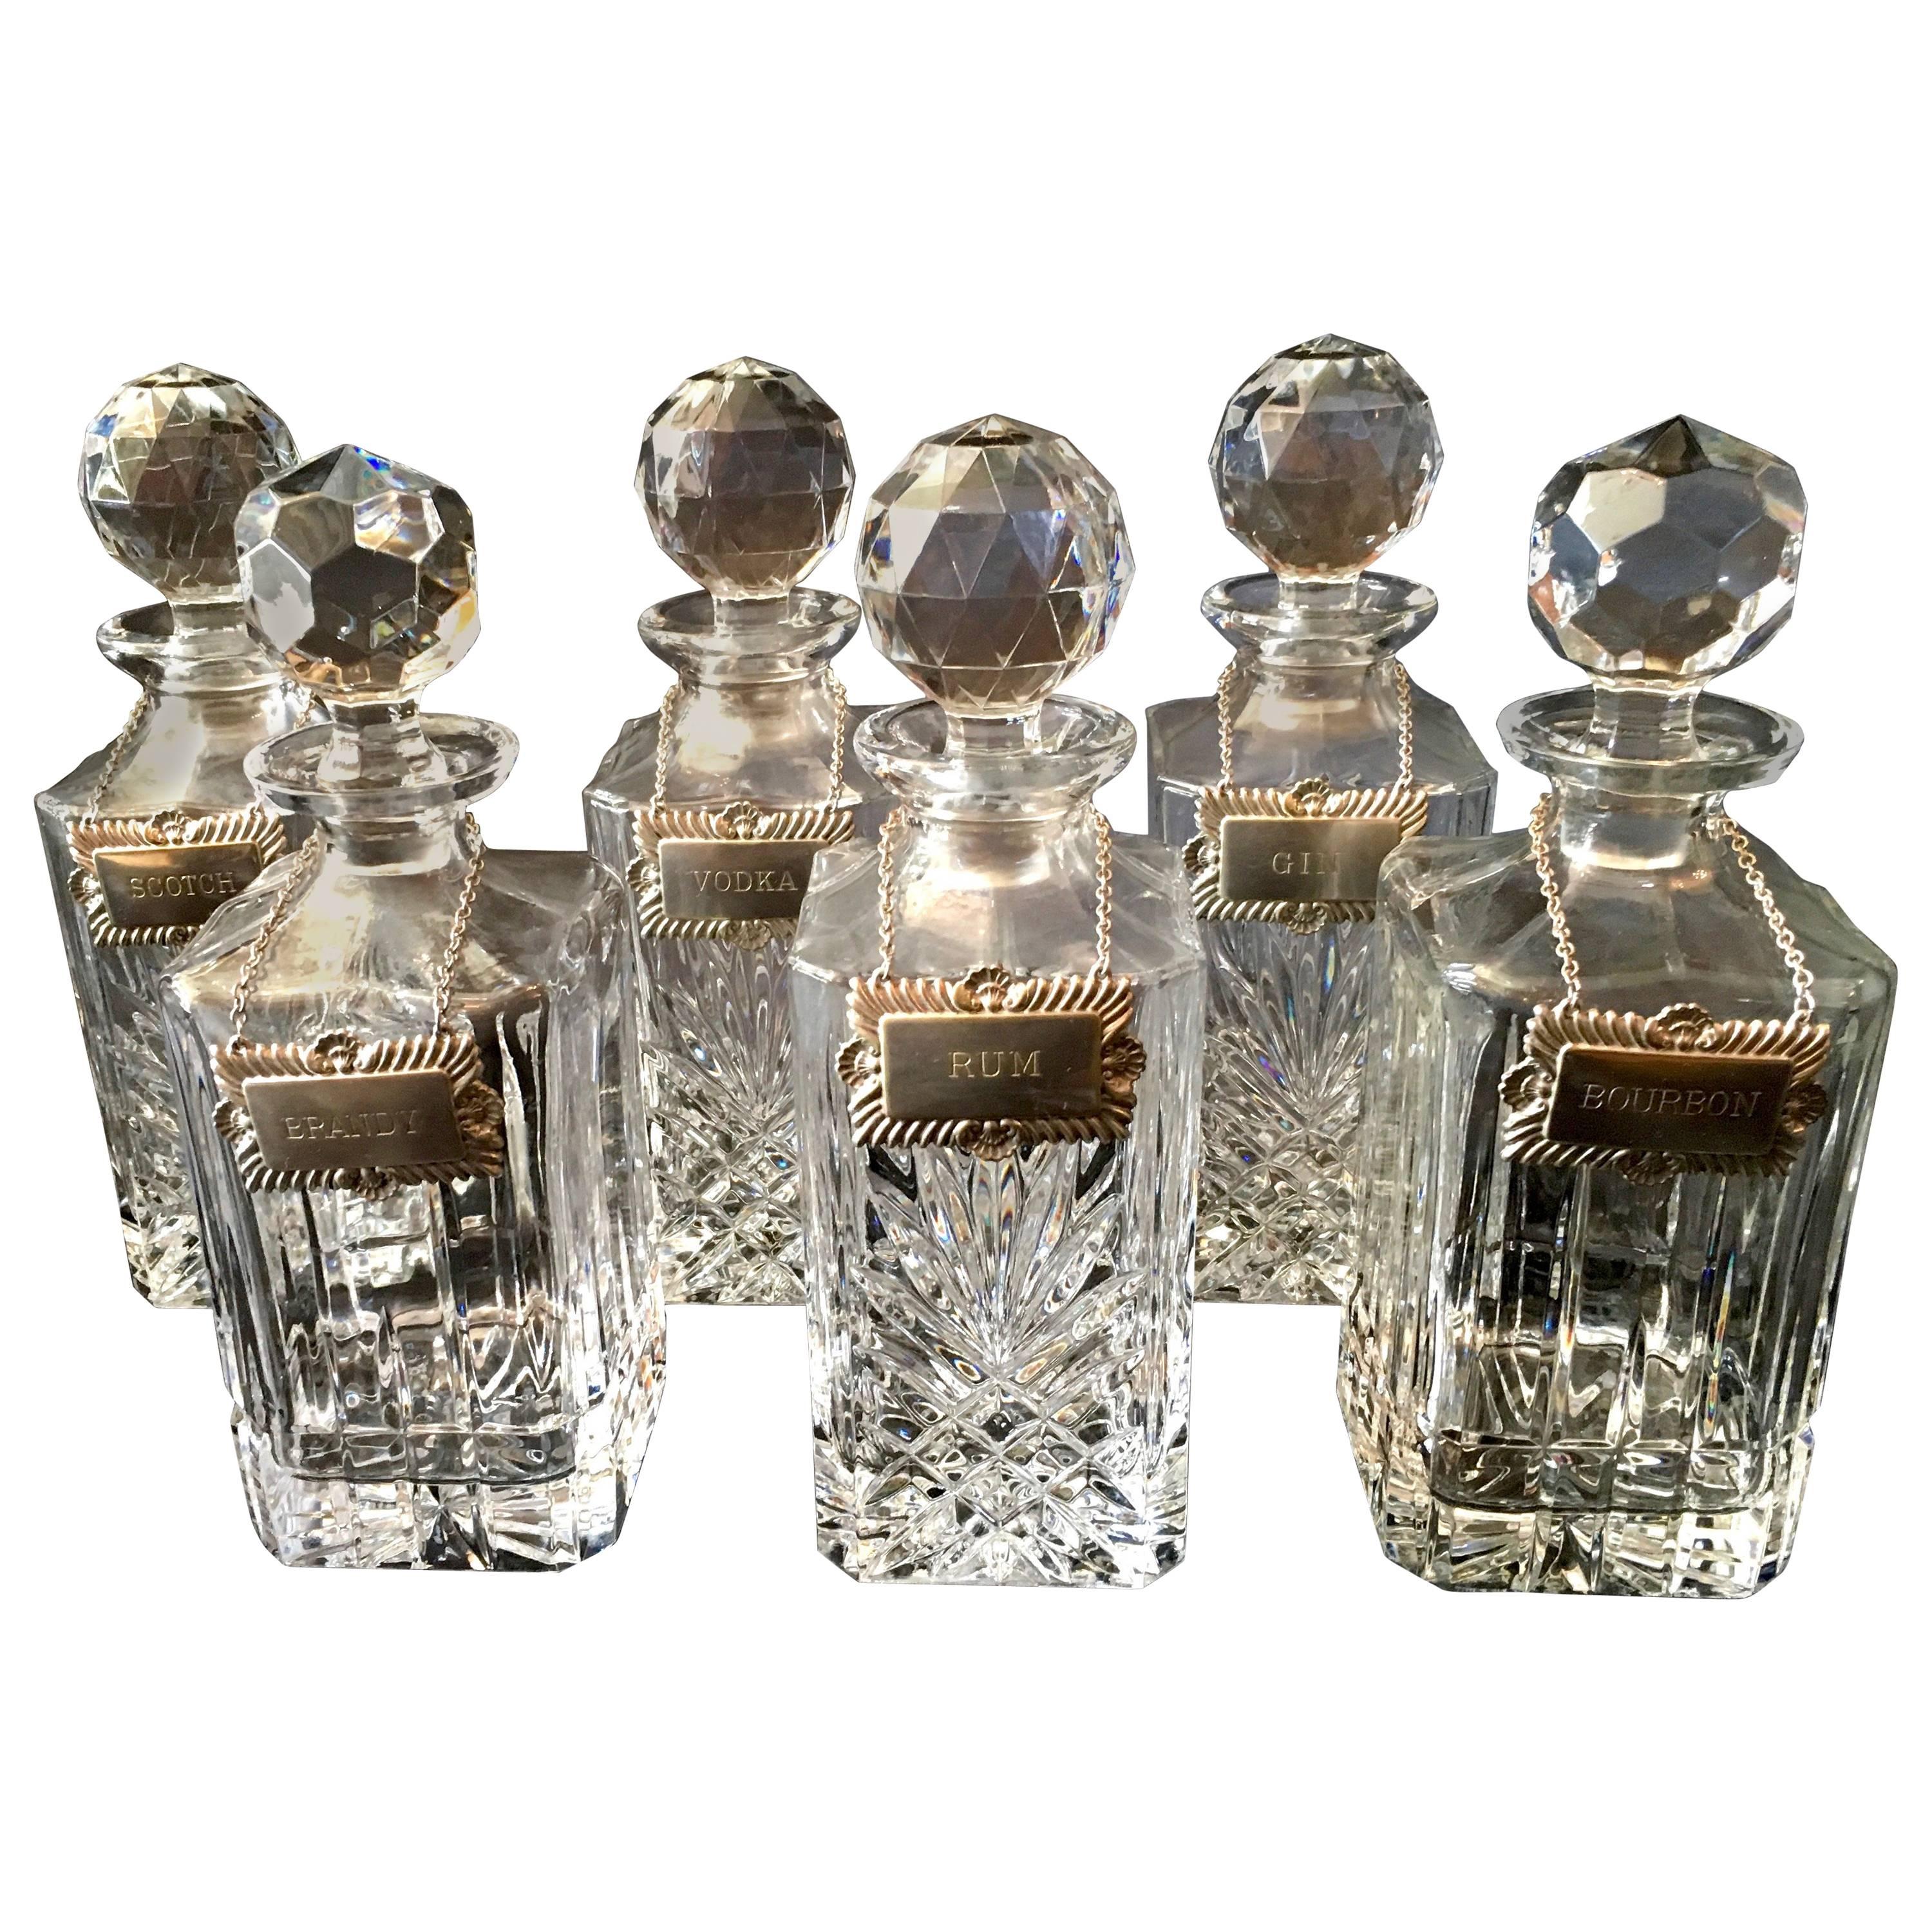 Six Very Desirable English Liquor Decanters with Silver Plate Labels